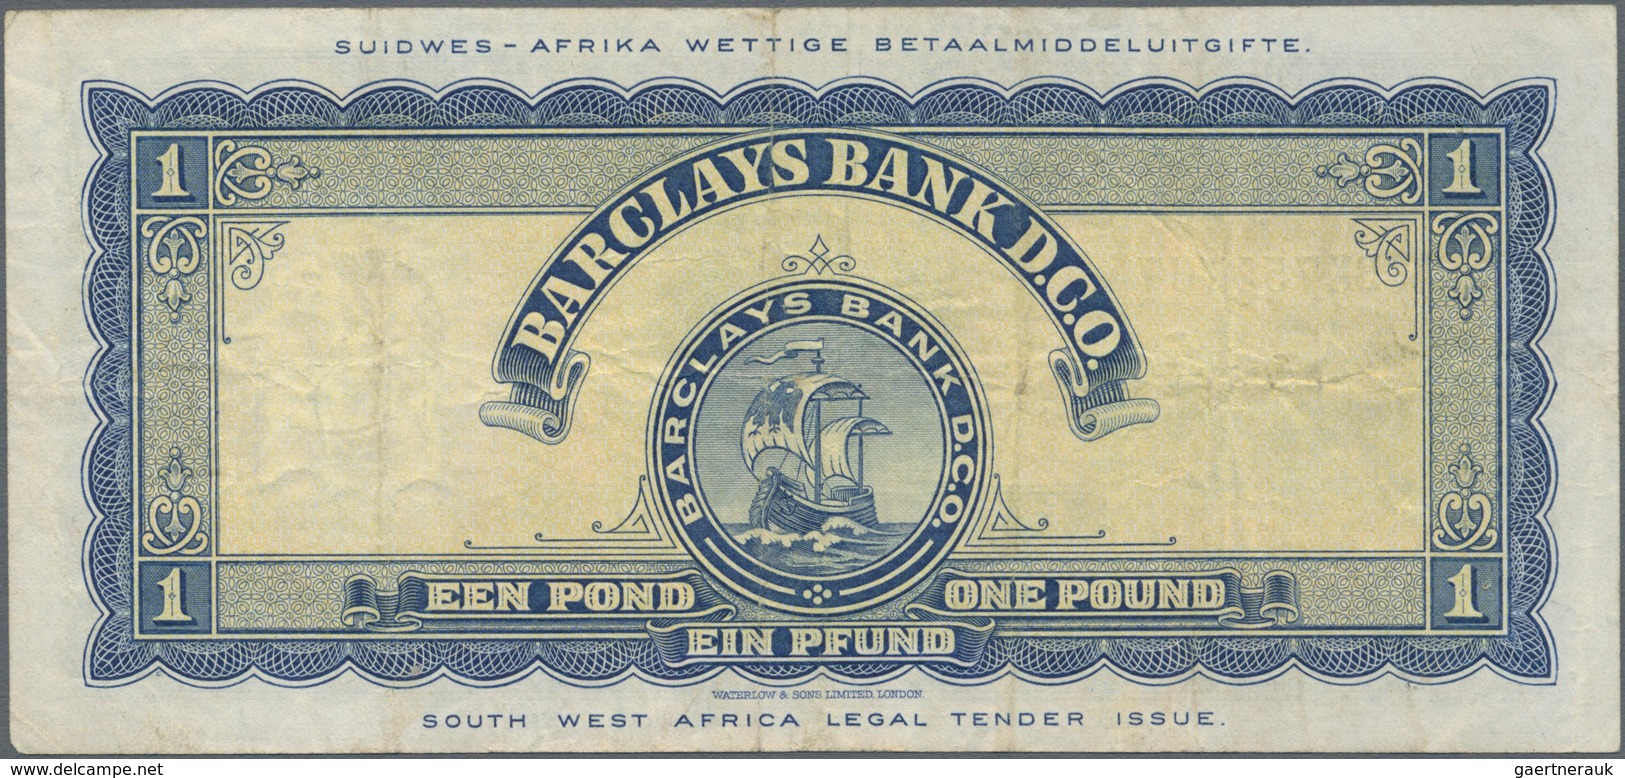 Southwest Africa: Barclays Bank D.C.O. 1 Pound 1954, P.5a, Still Nice With A Few Folds And Minor Spo - Namibia